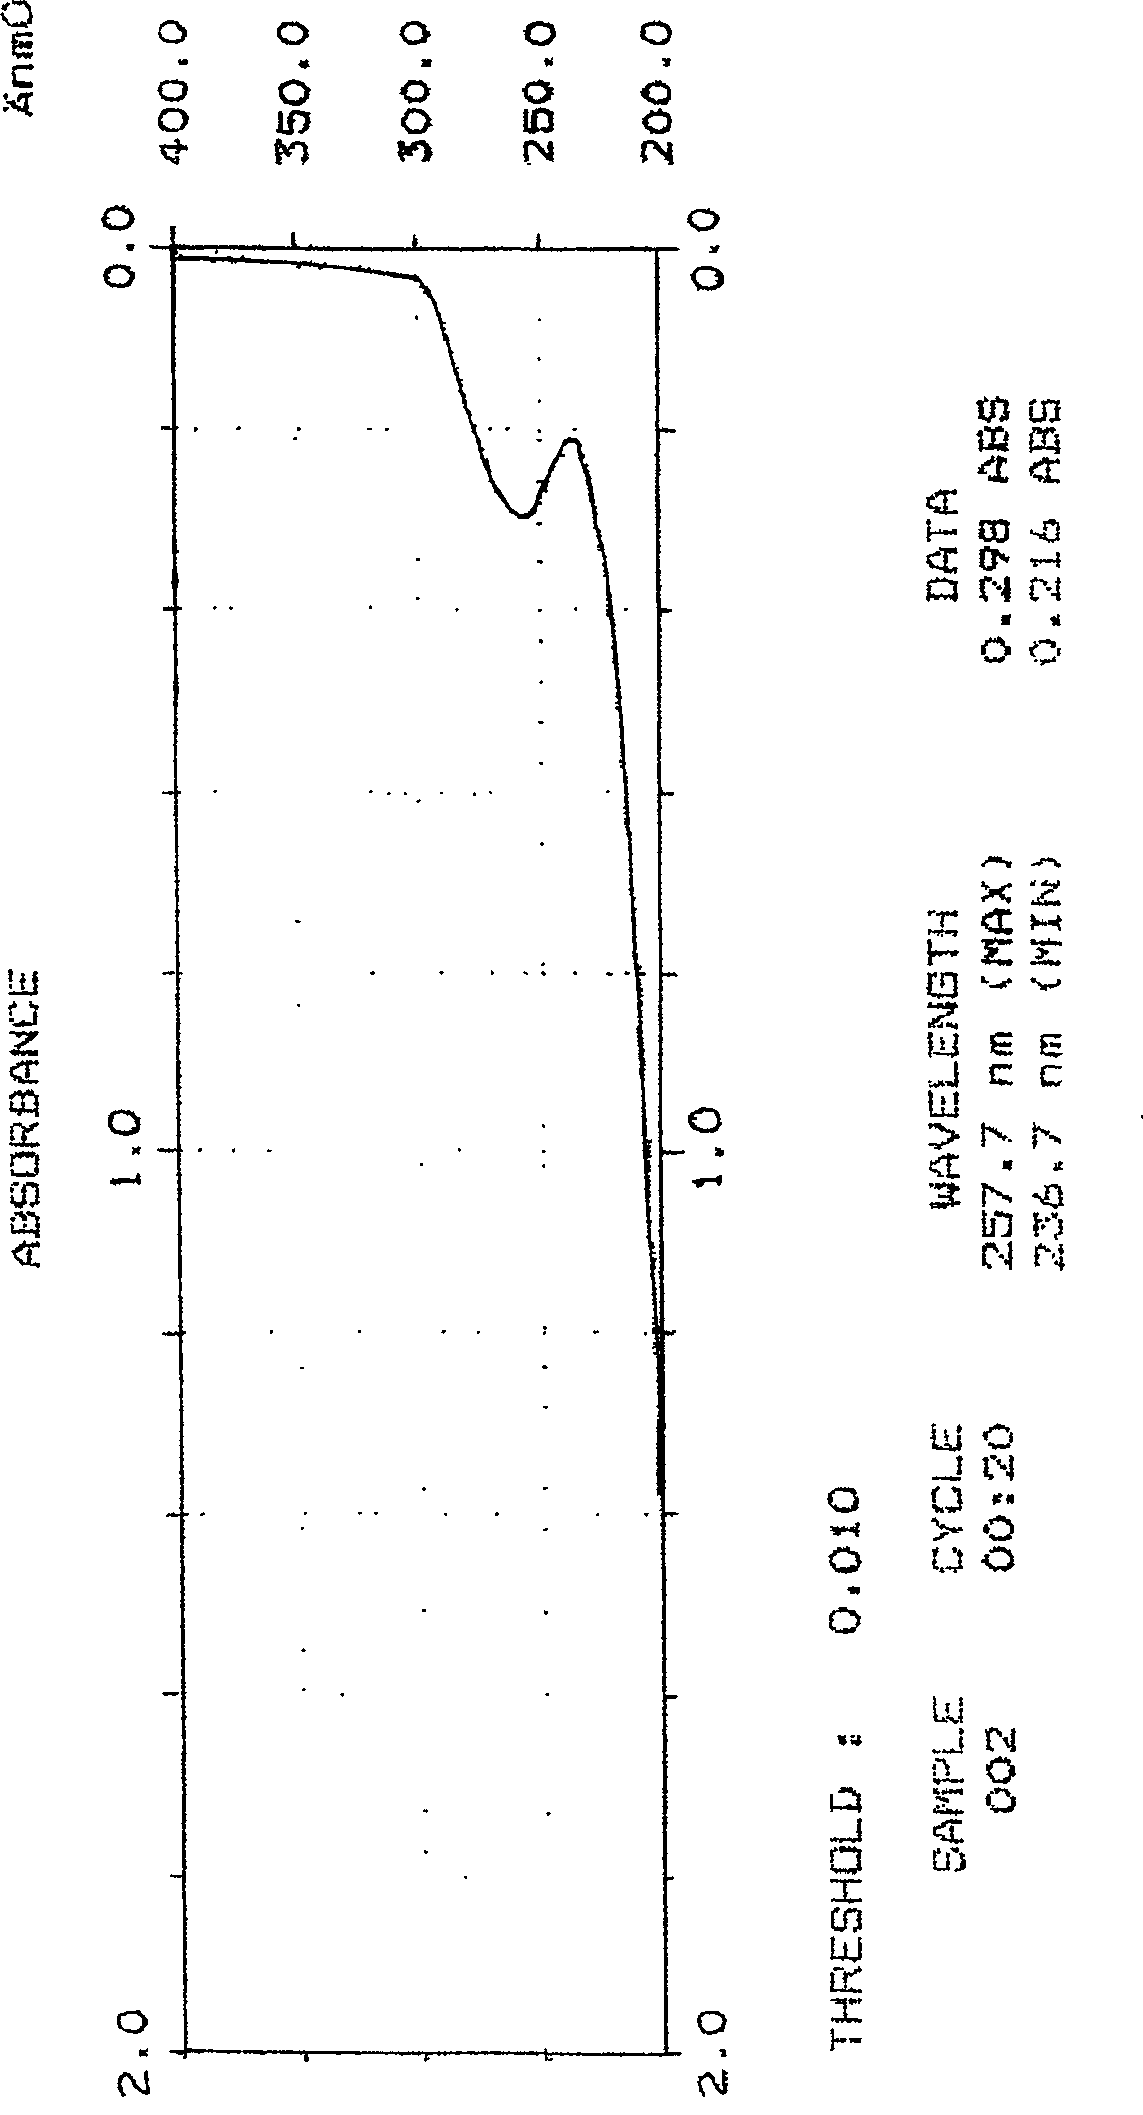 Animal stomach extract and use thereof as medicament for treating gastropathy